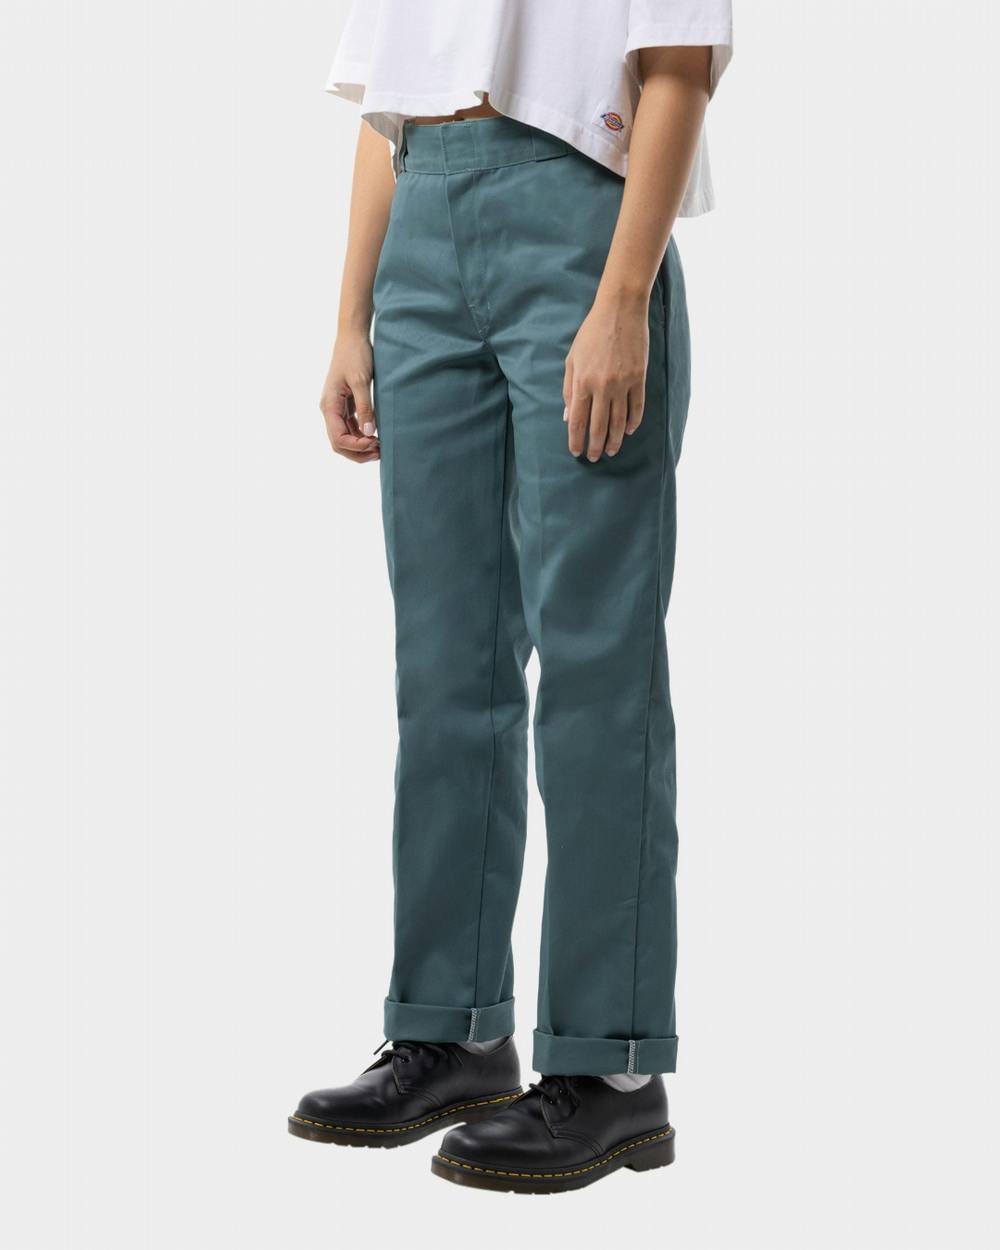 875 Tapered Fit Women's Pant